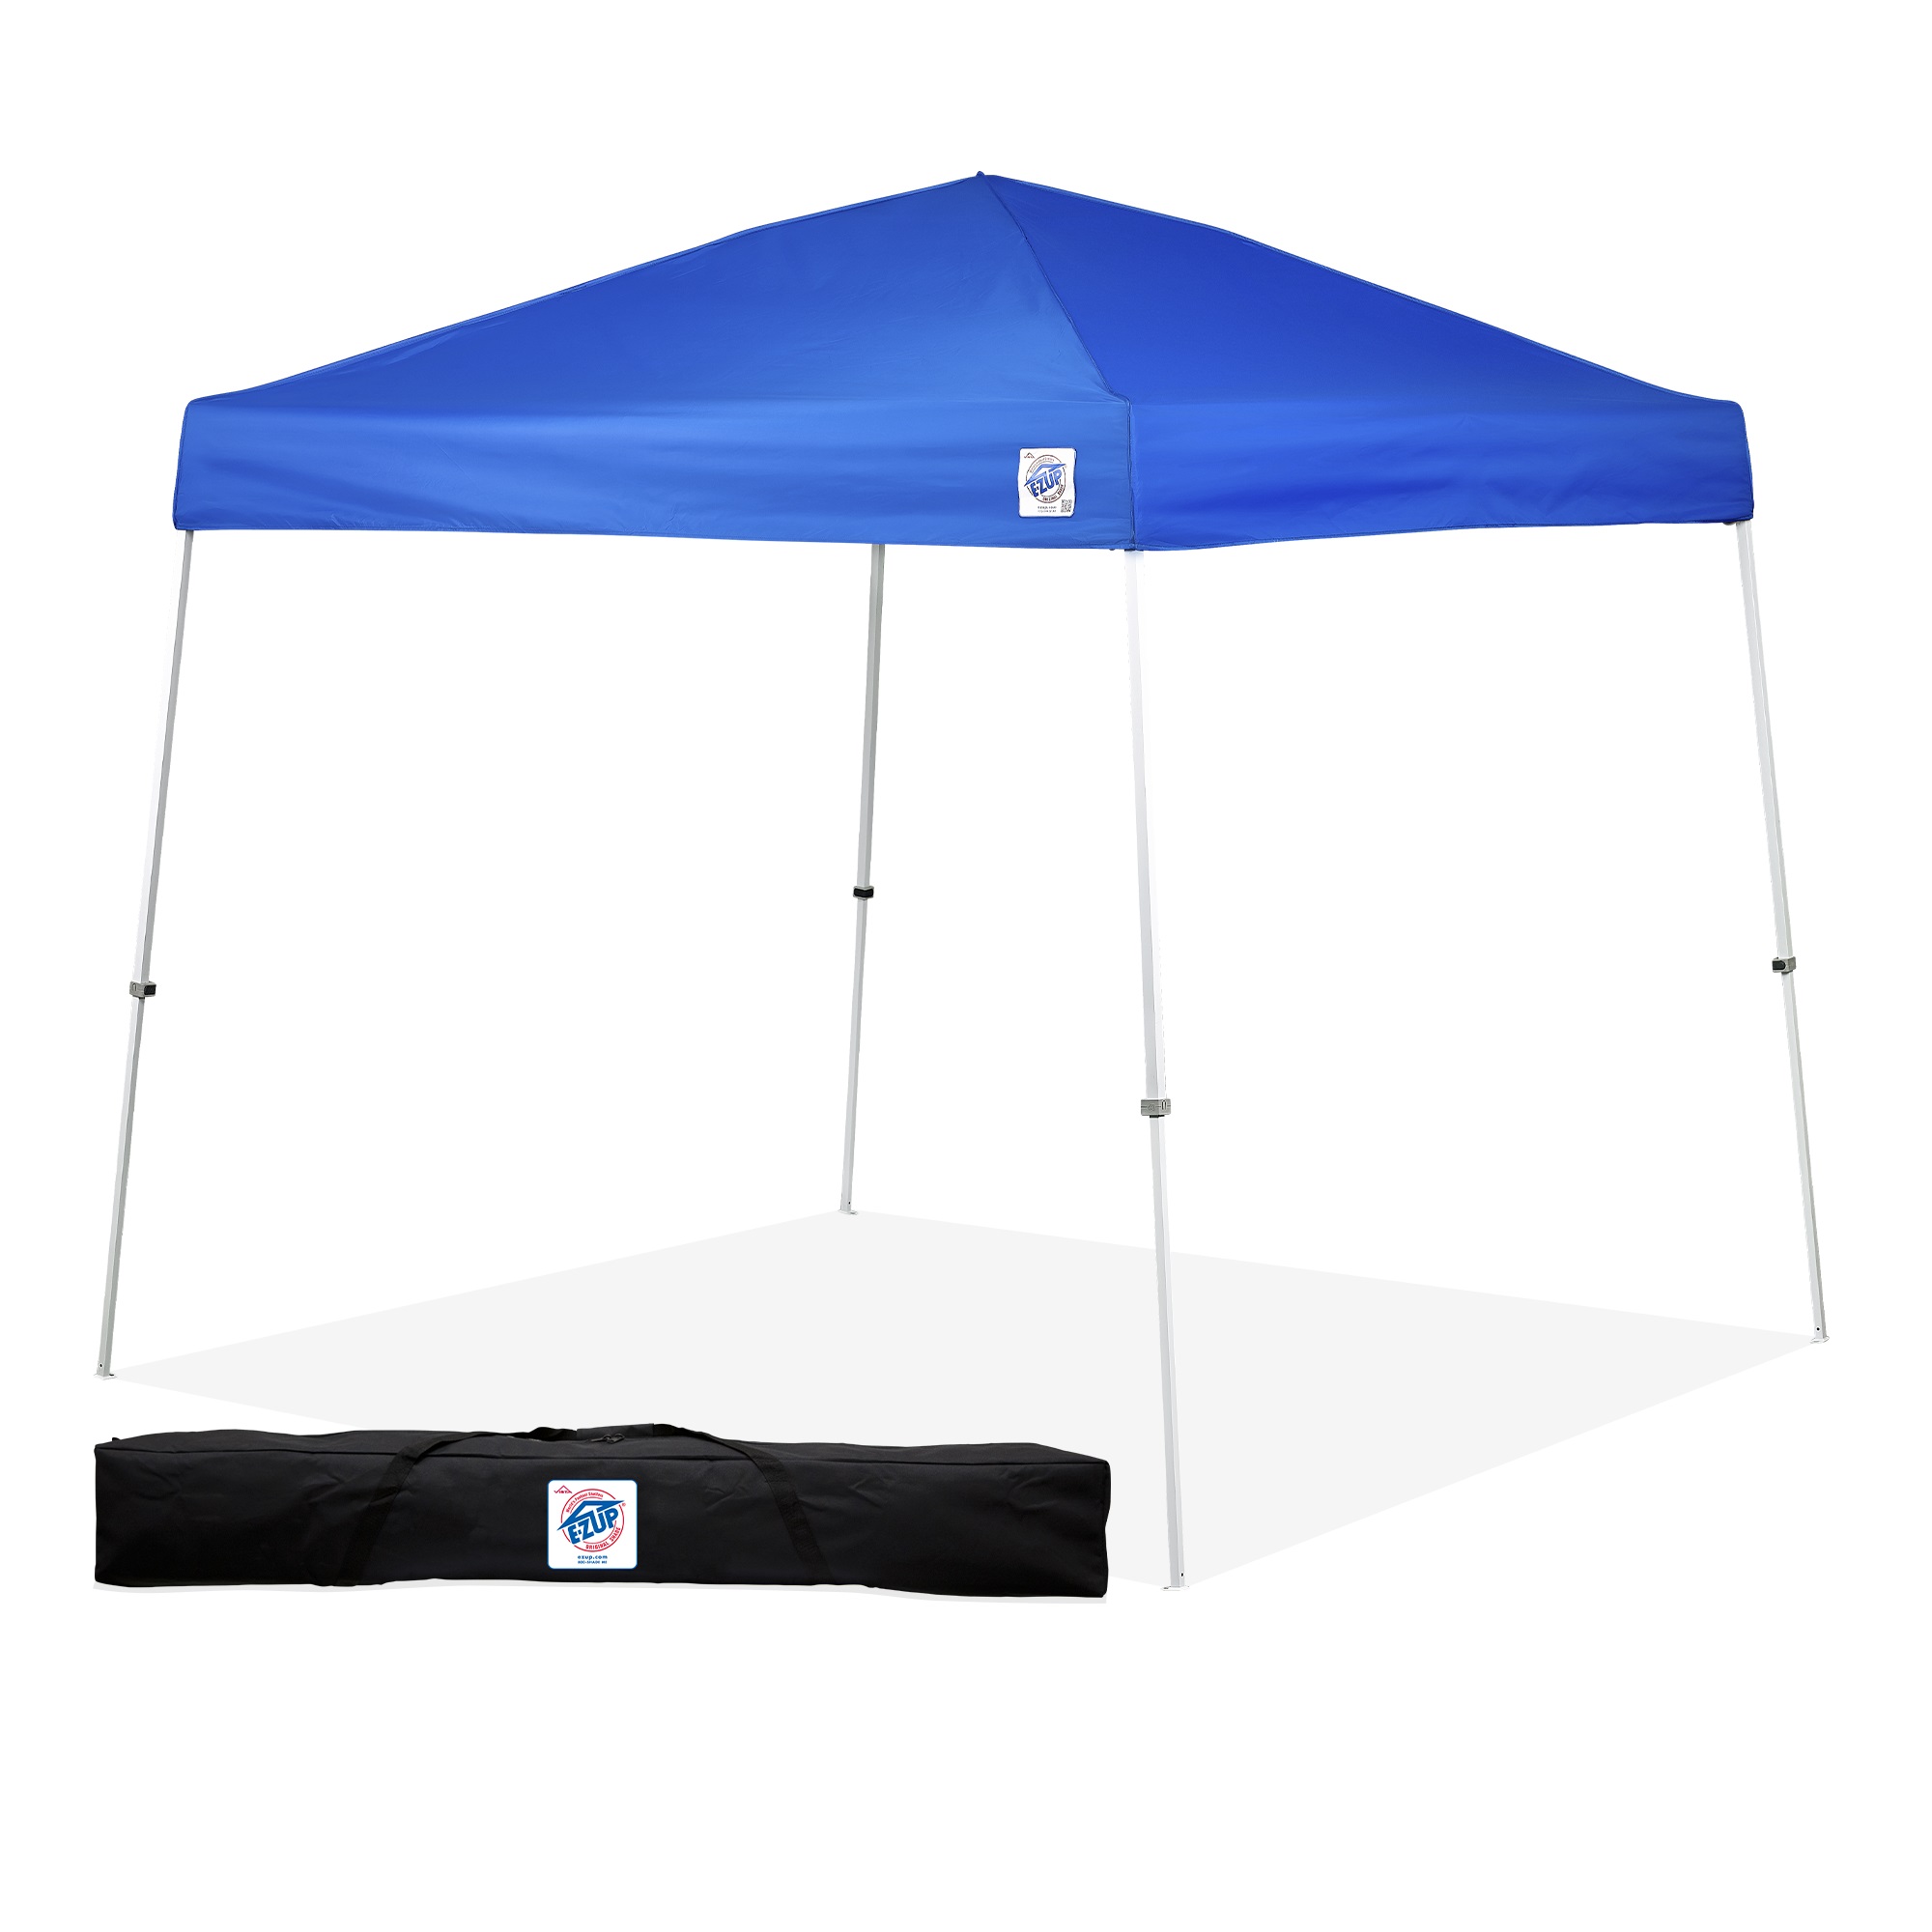 Bijproduct String string Vies E-Z UP 12 ft. x 12 ft. Royal Blue Top Vista Tent Canopy - White Cap